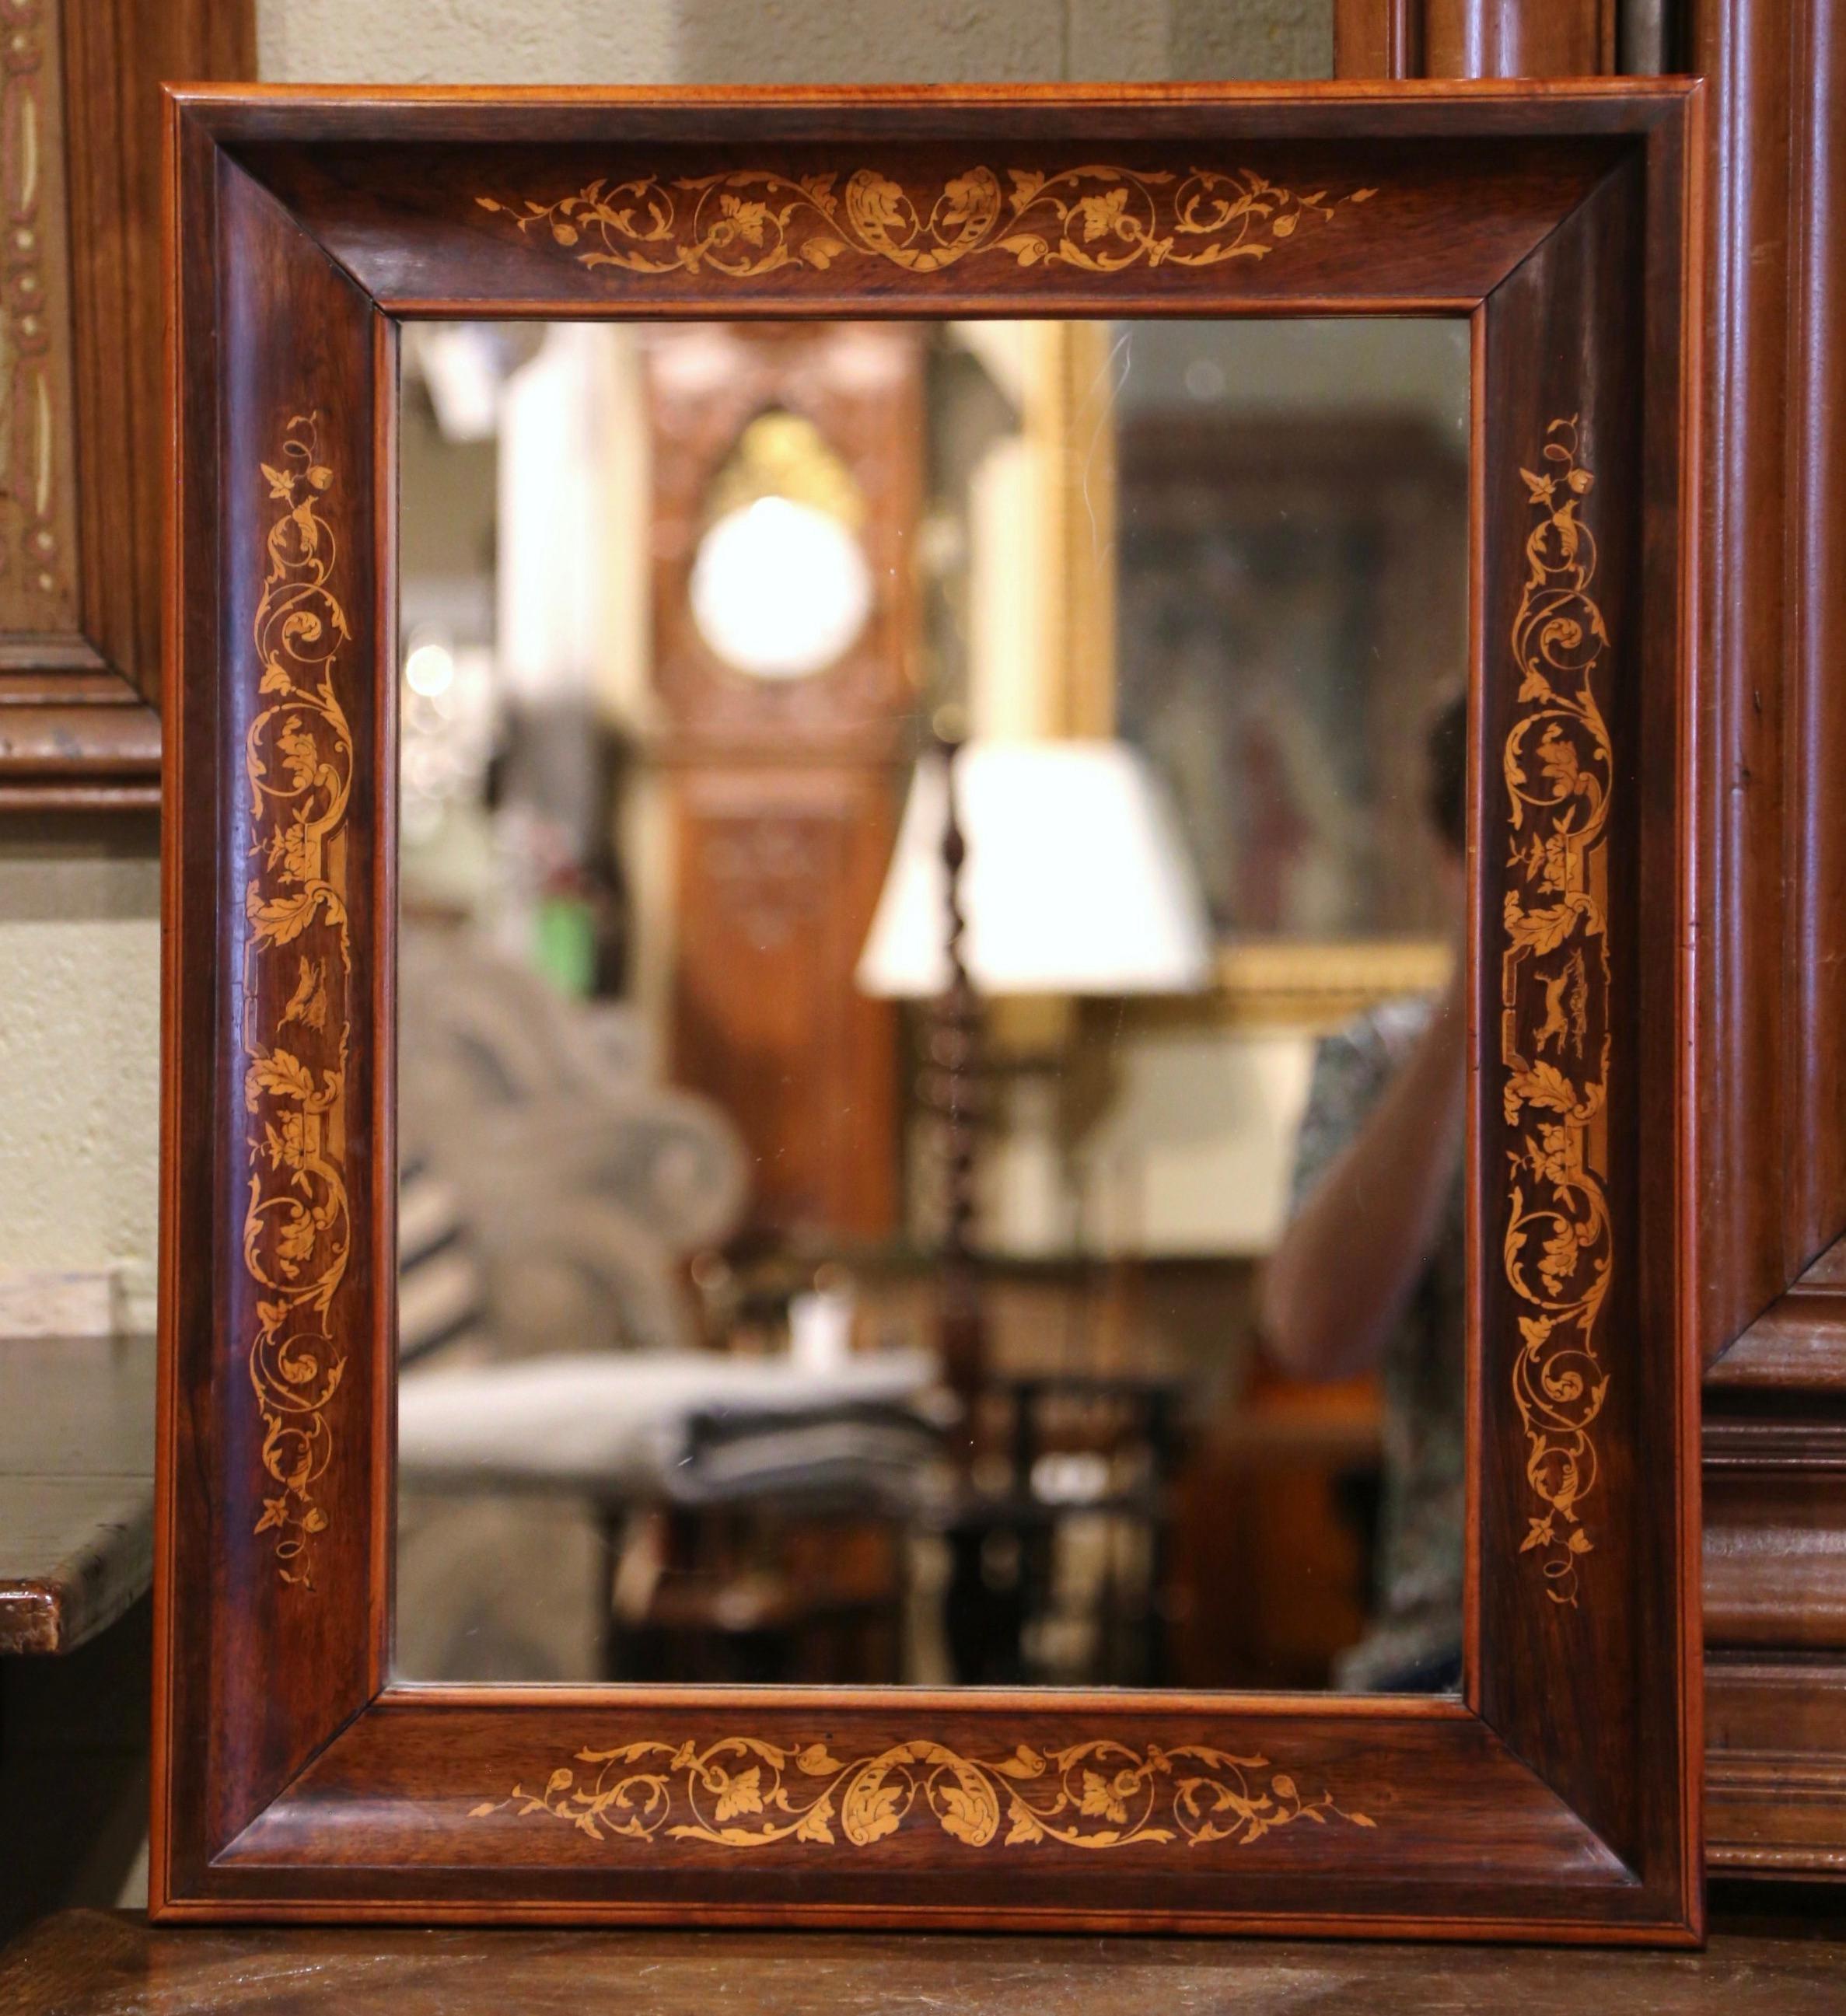 19th Century French Napoleon III Walnut Inlaid Wall Mirror with Floral Motifs For Sale 1